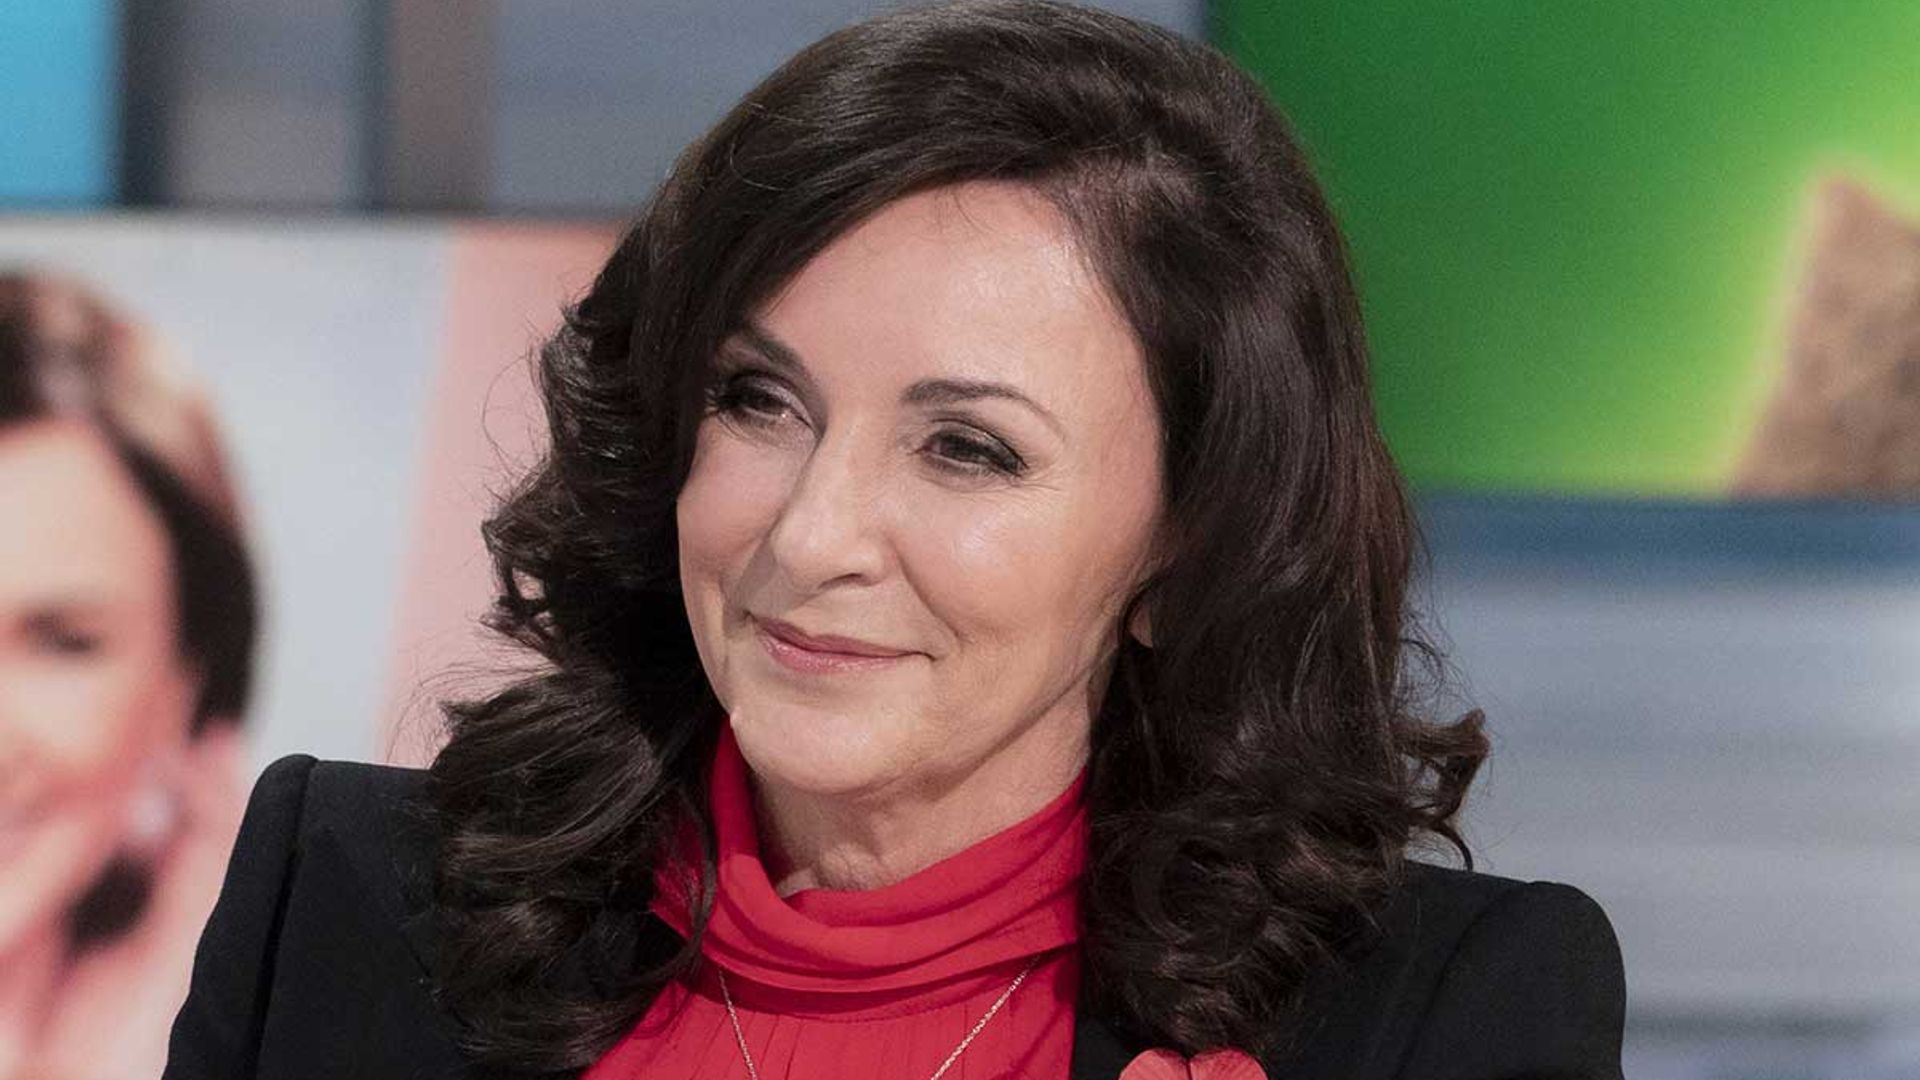 Shirley Ballas shares new health update after 'alarming' test results